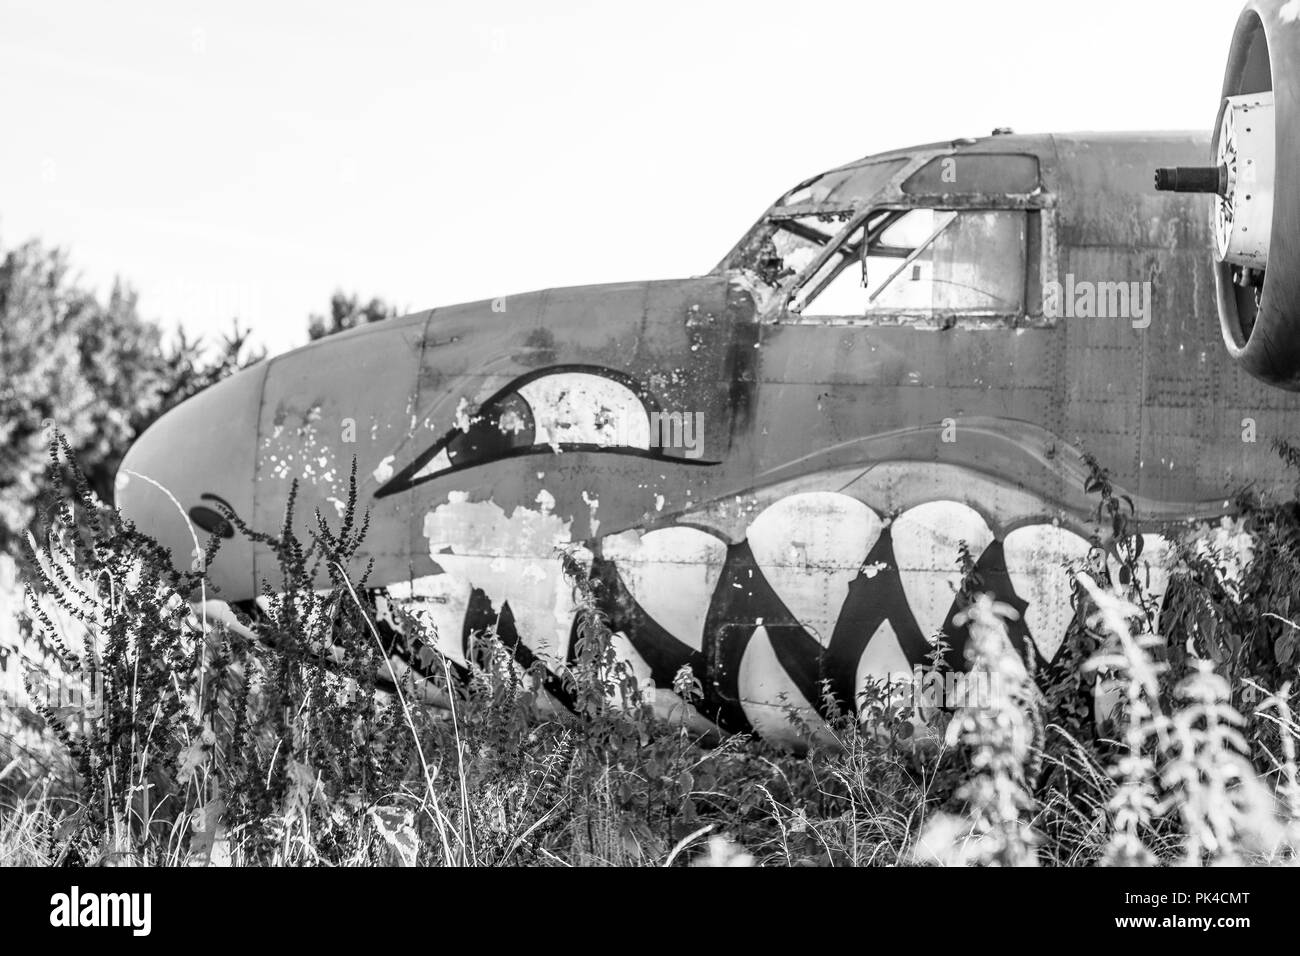 World War 2 plane abandoned at a disused airport in the UK. Stock Photo